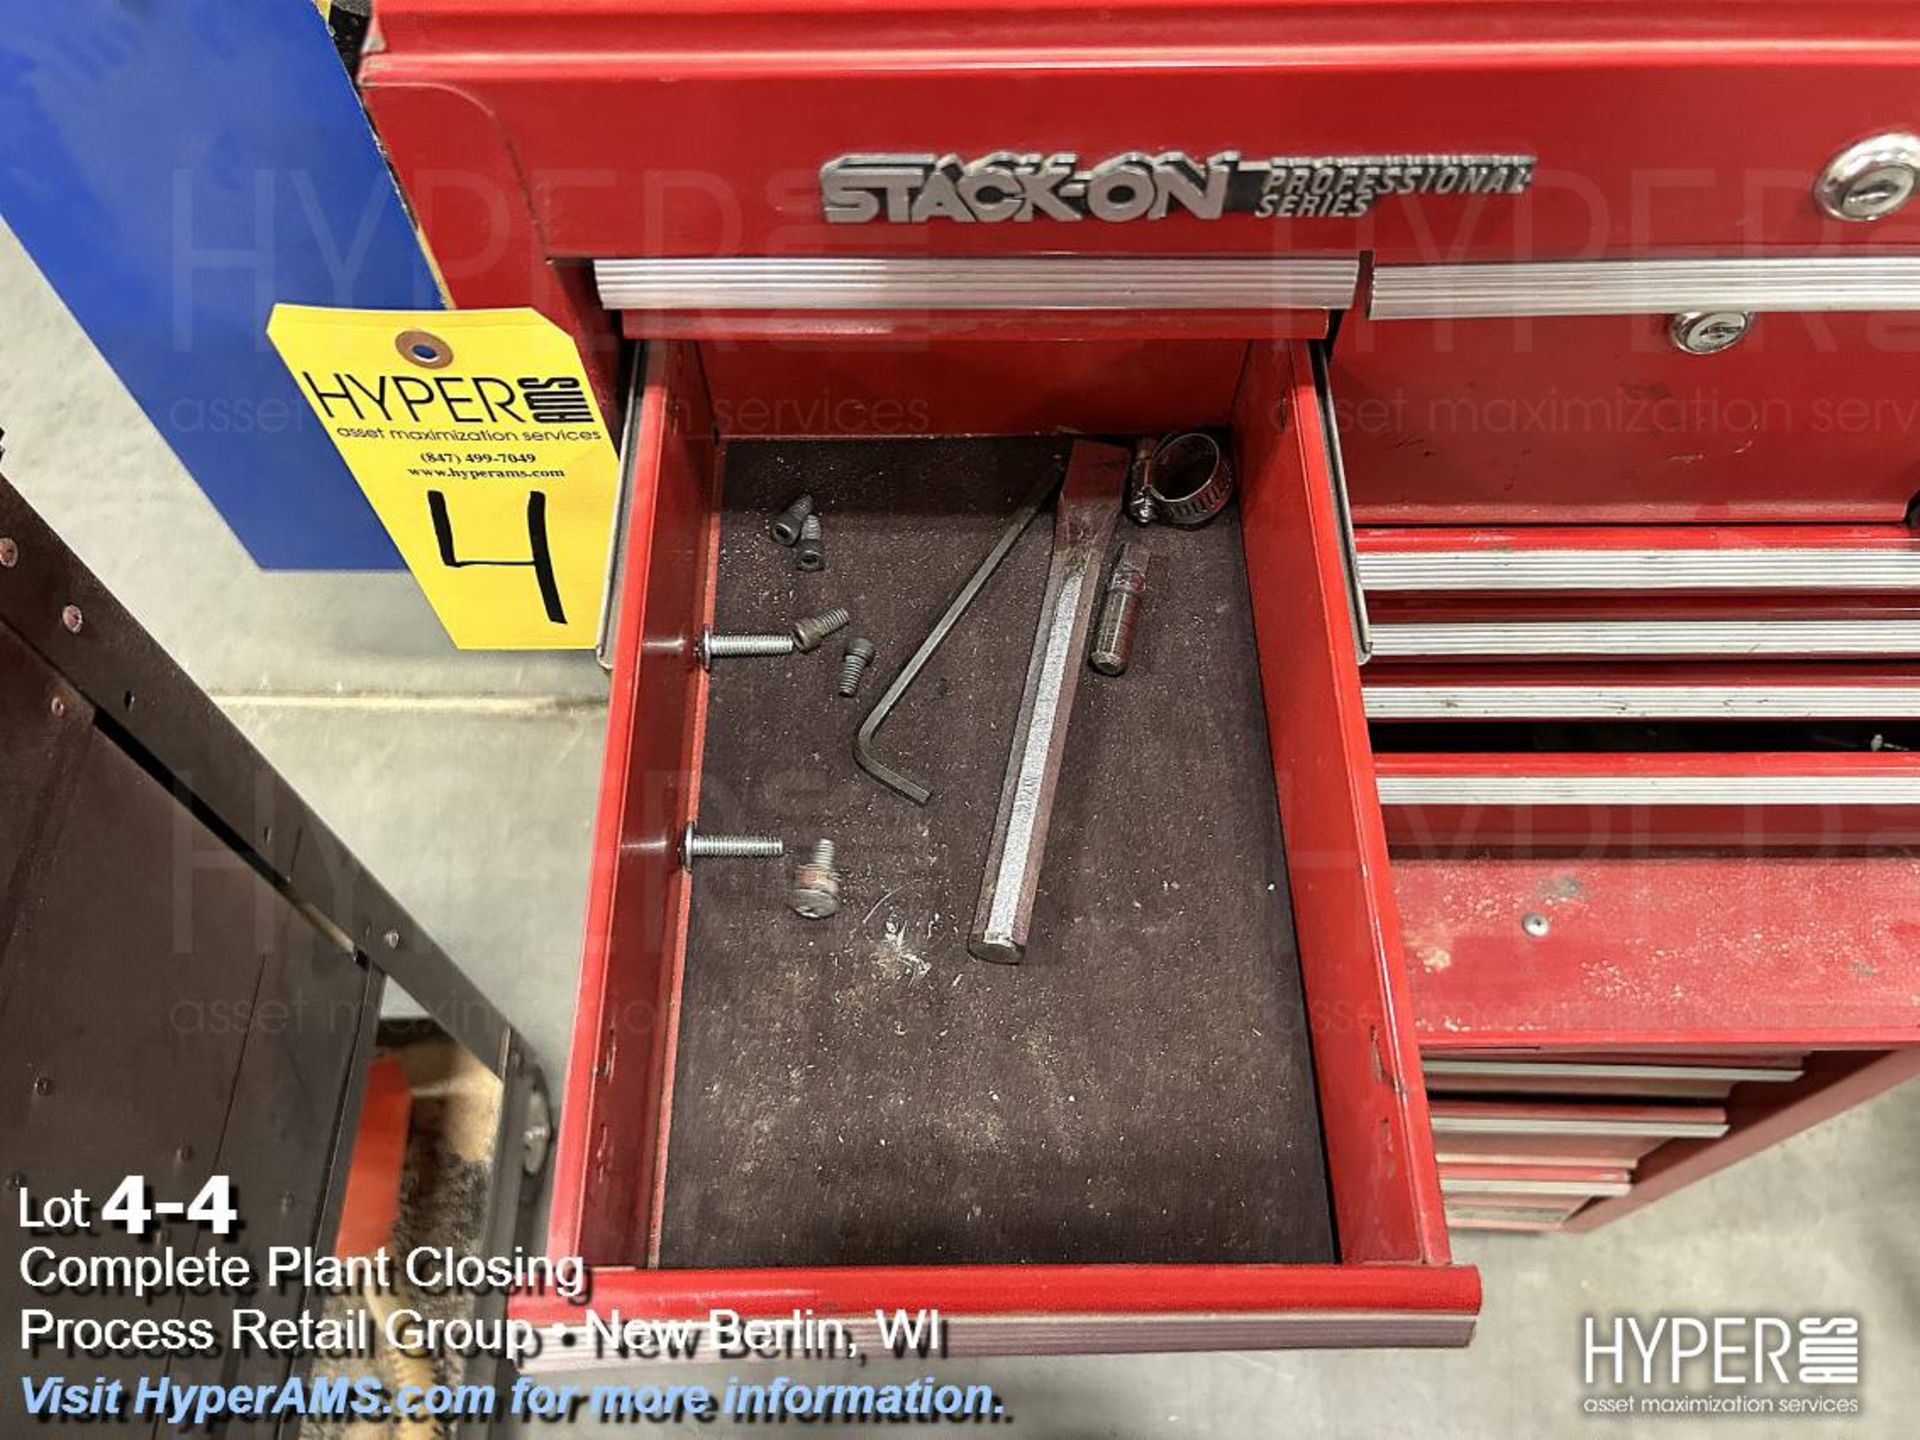 Stack-on roll around toolbox - Image 4 of 12